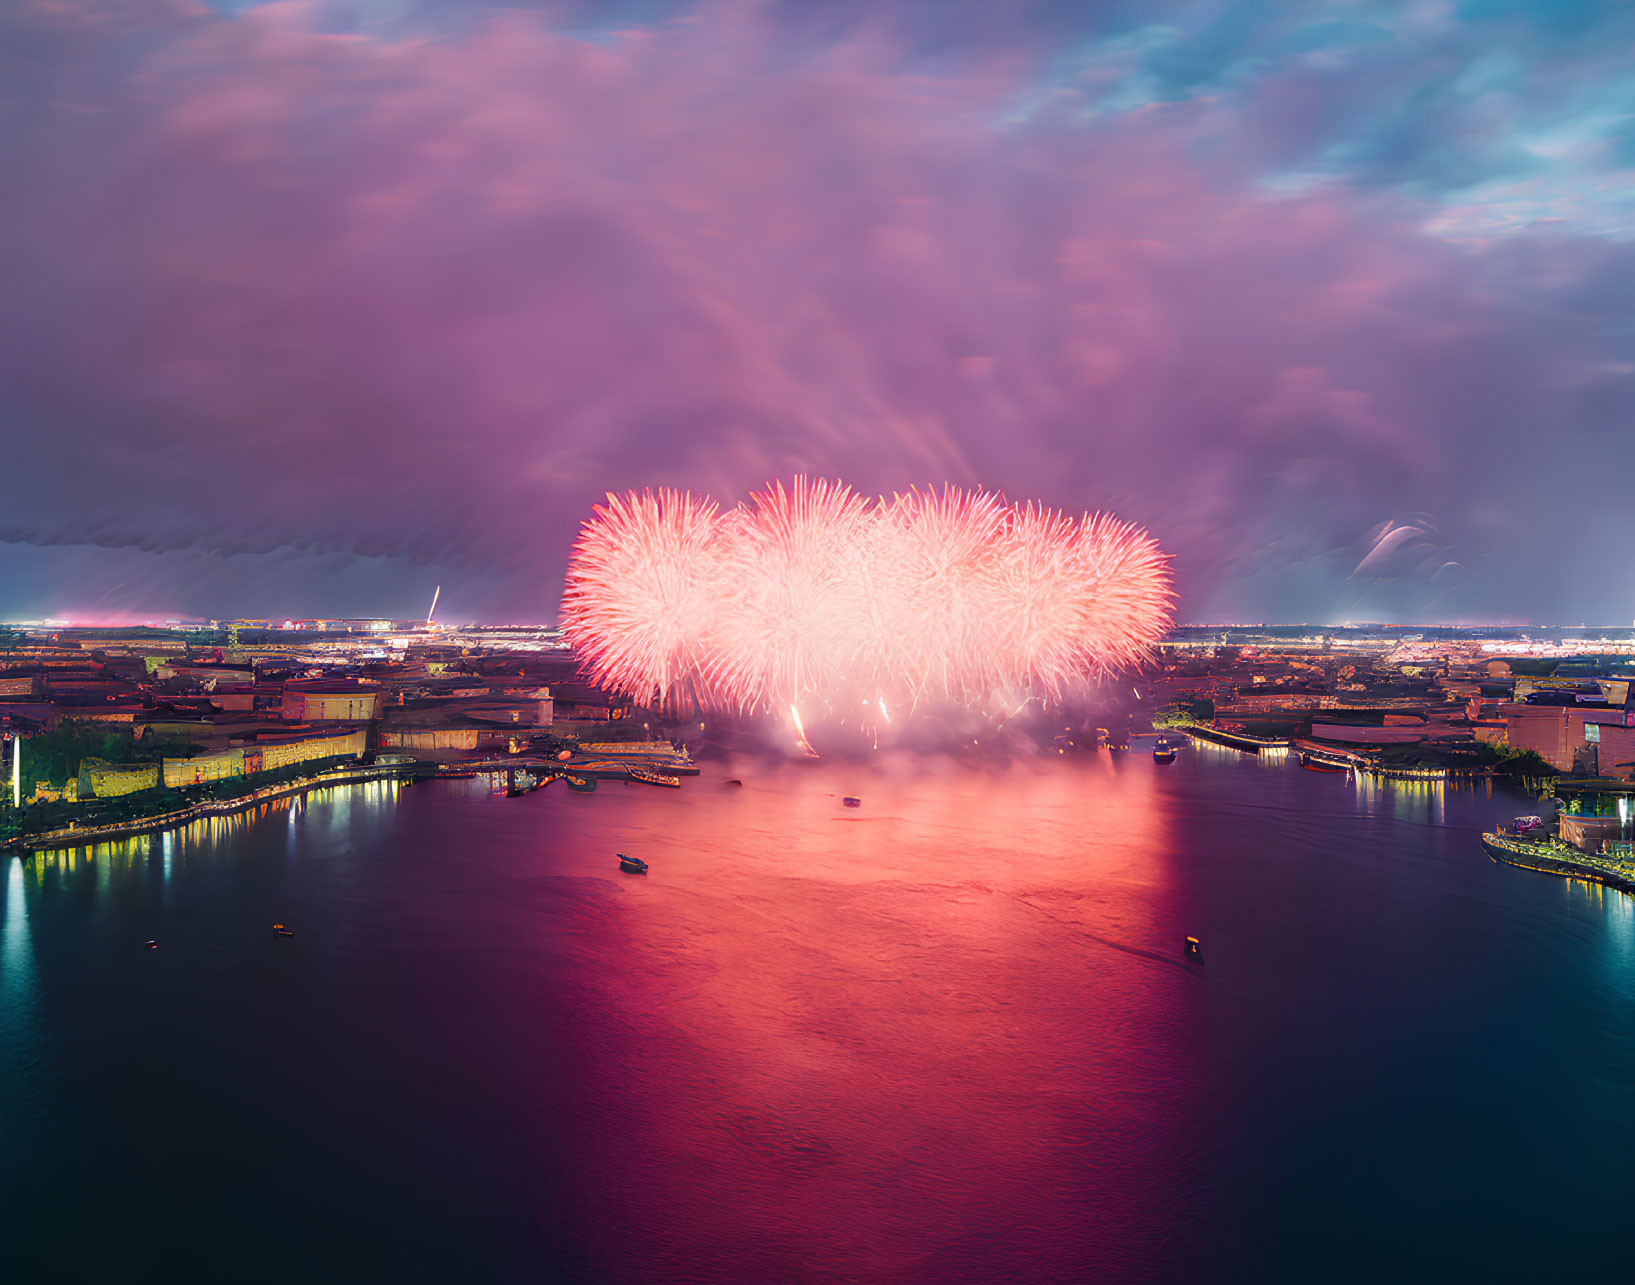 Colorful fireworks display over city waterfront at night